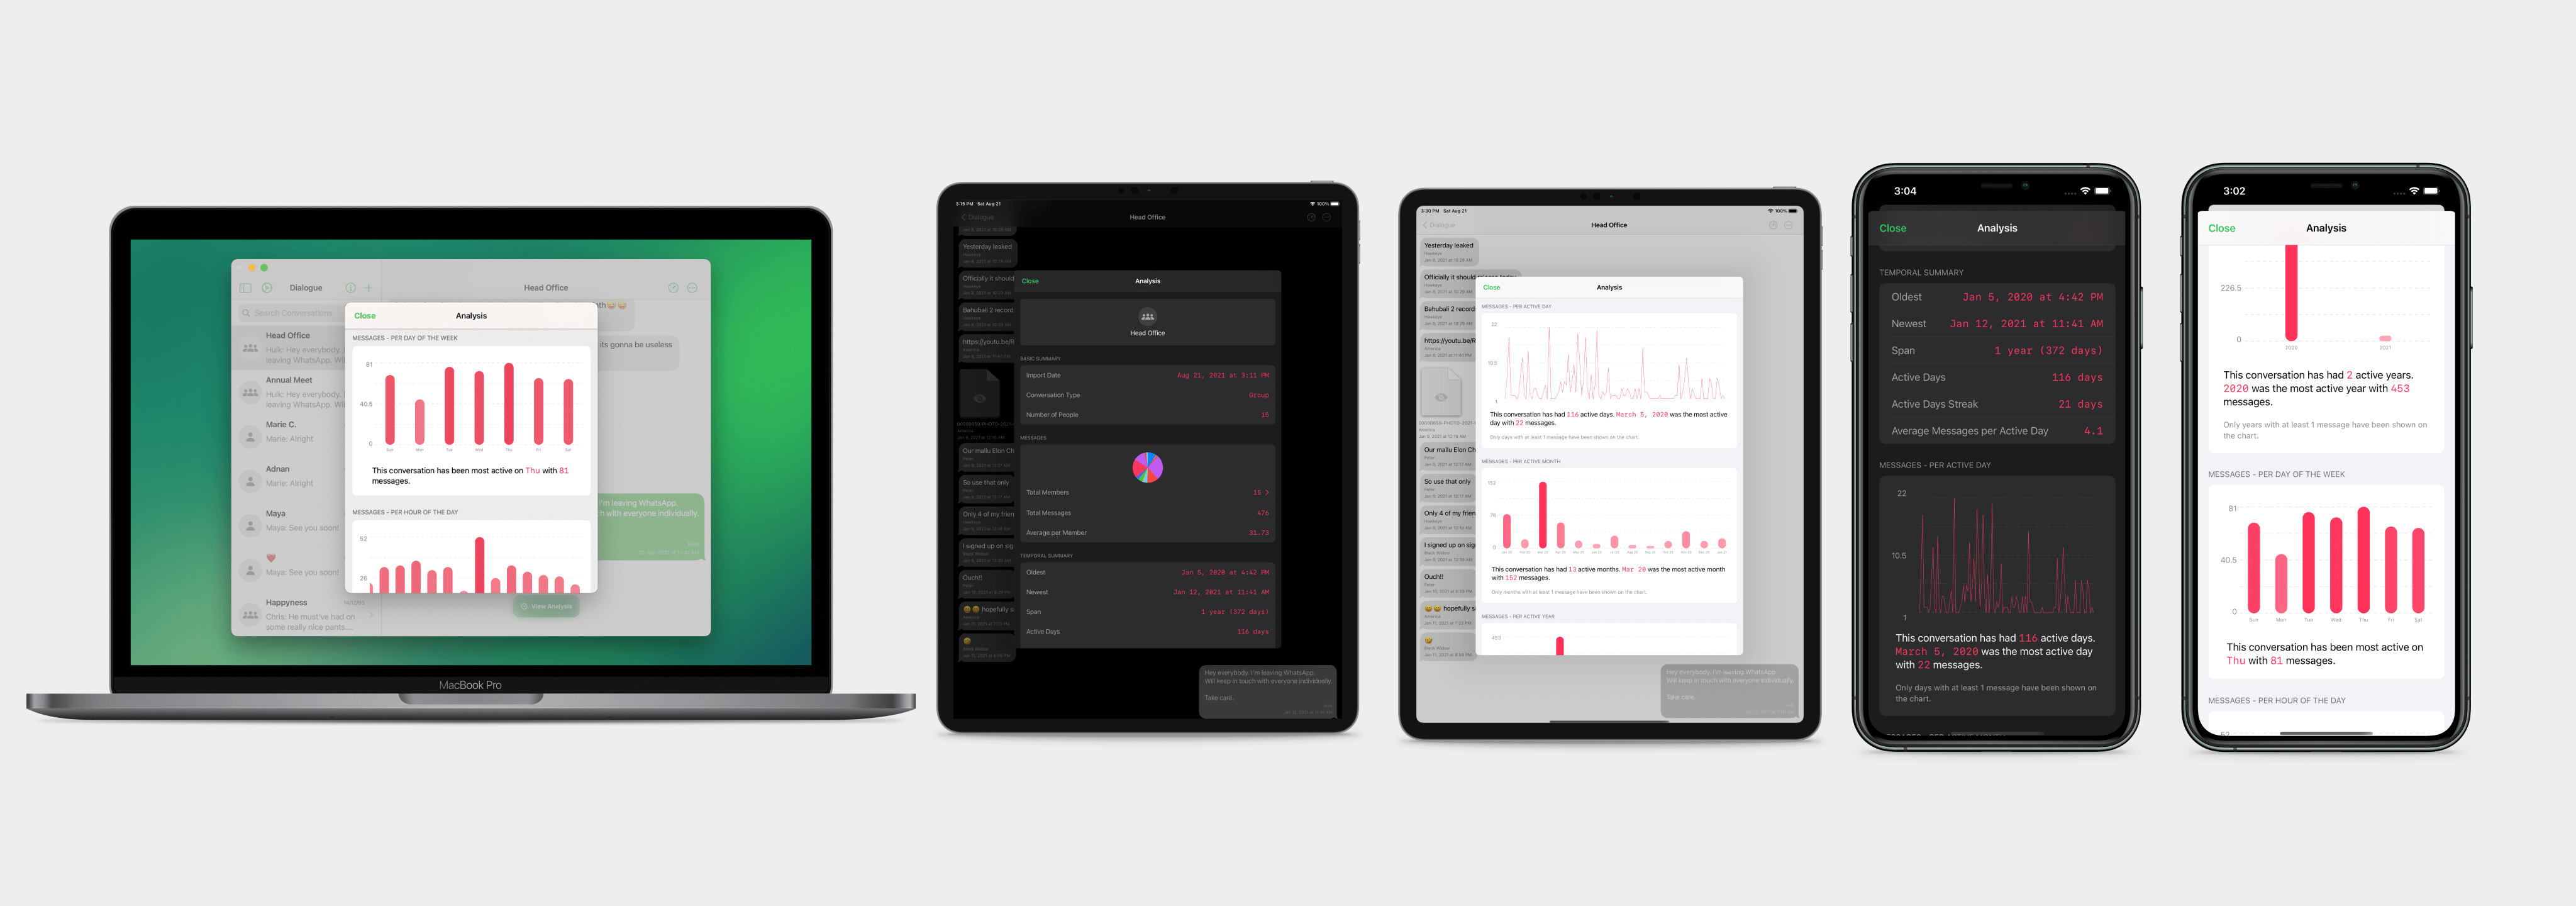 A deck showing various apple devices running the Dialogue app with Analyze views opened.